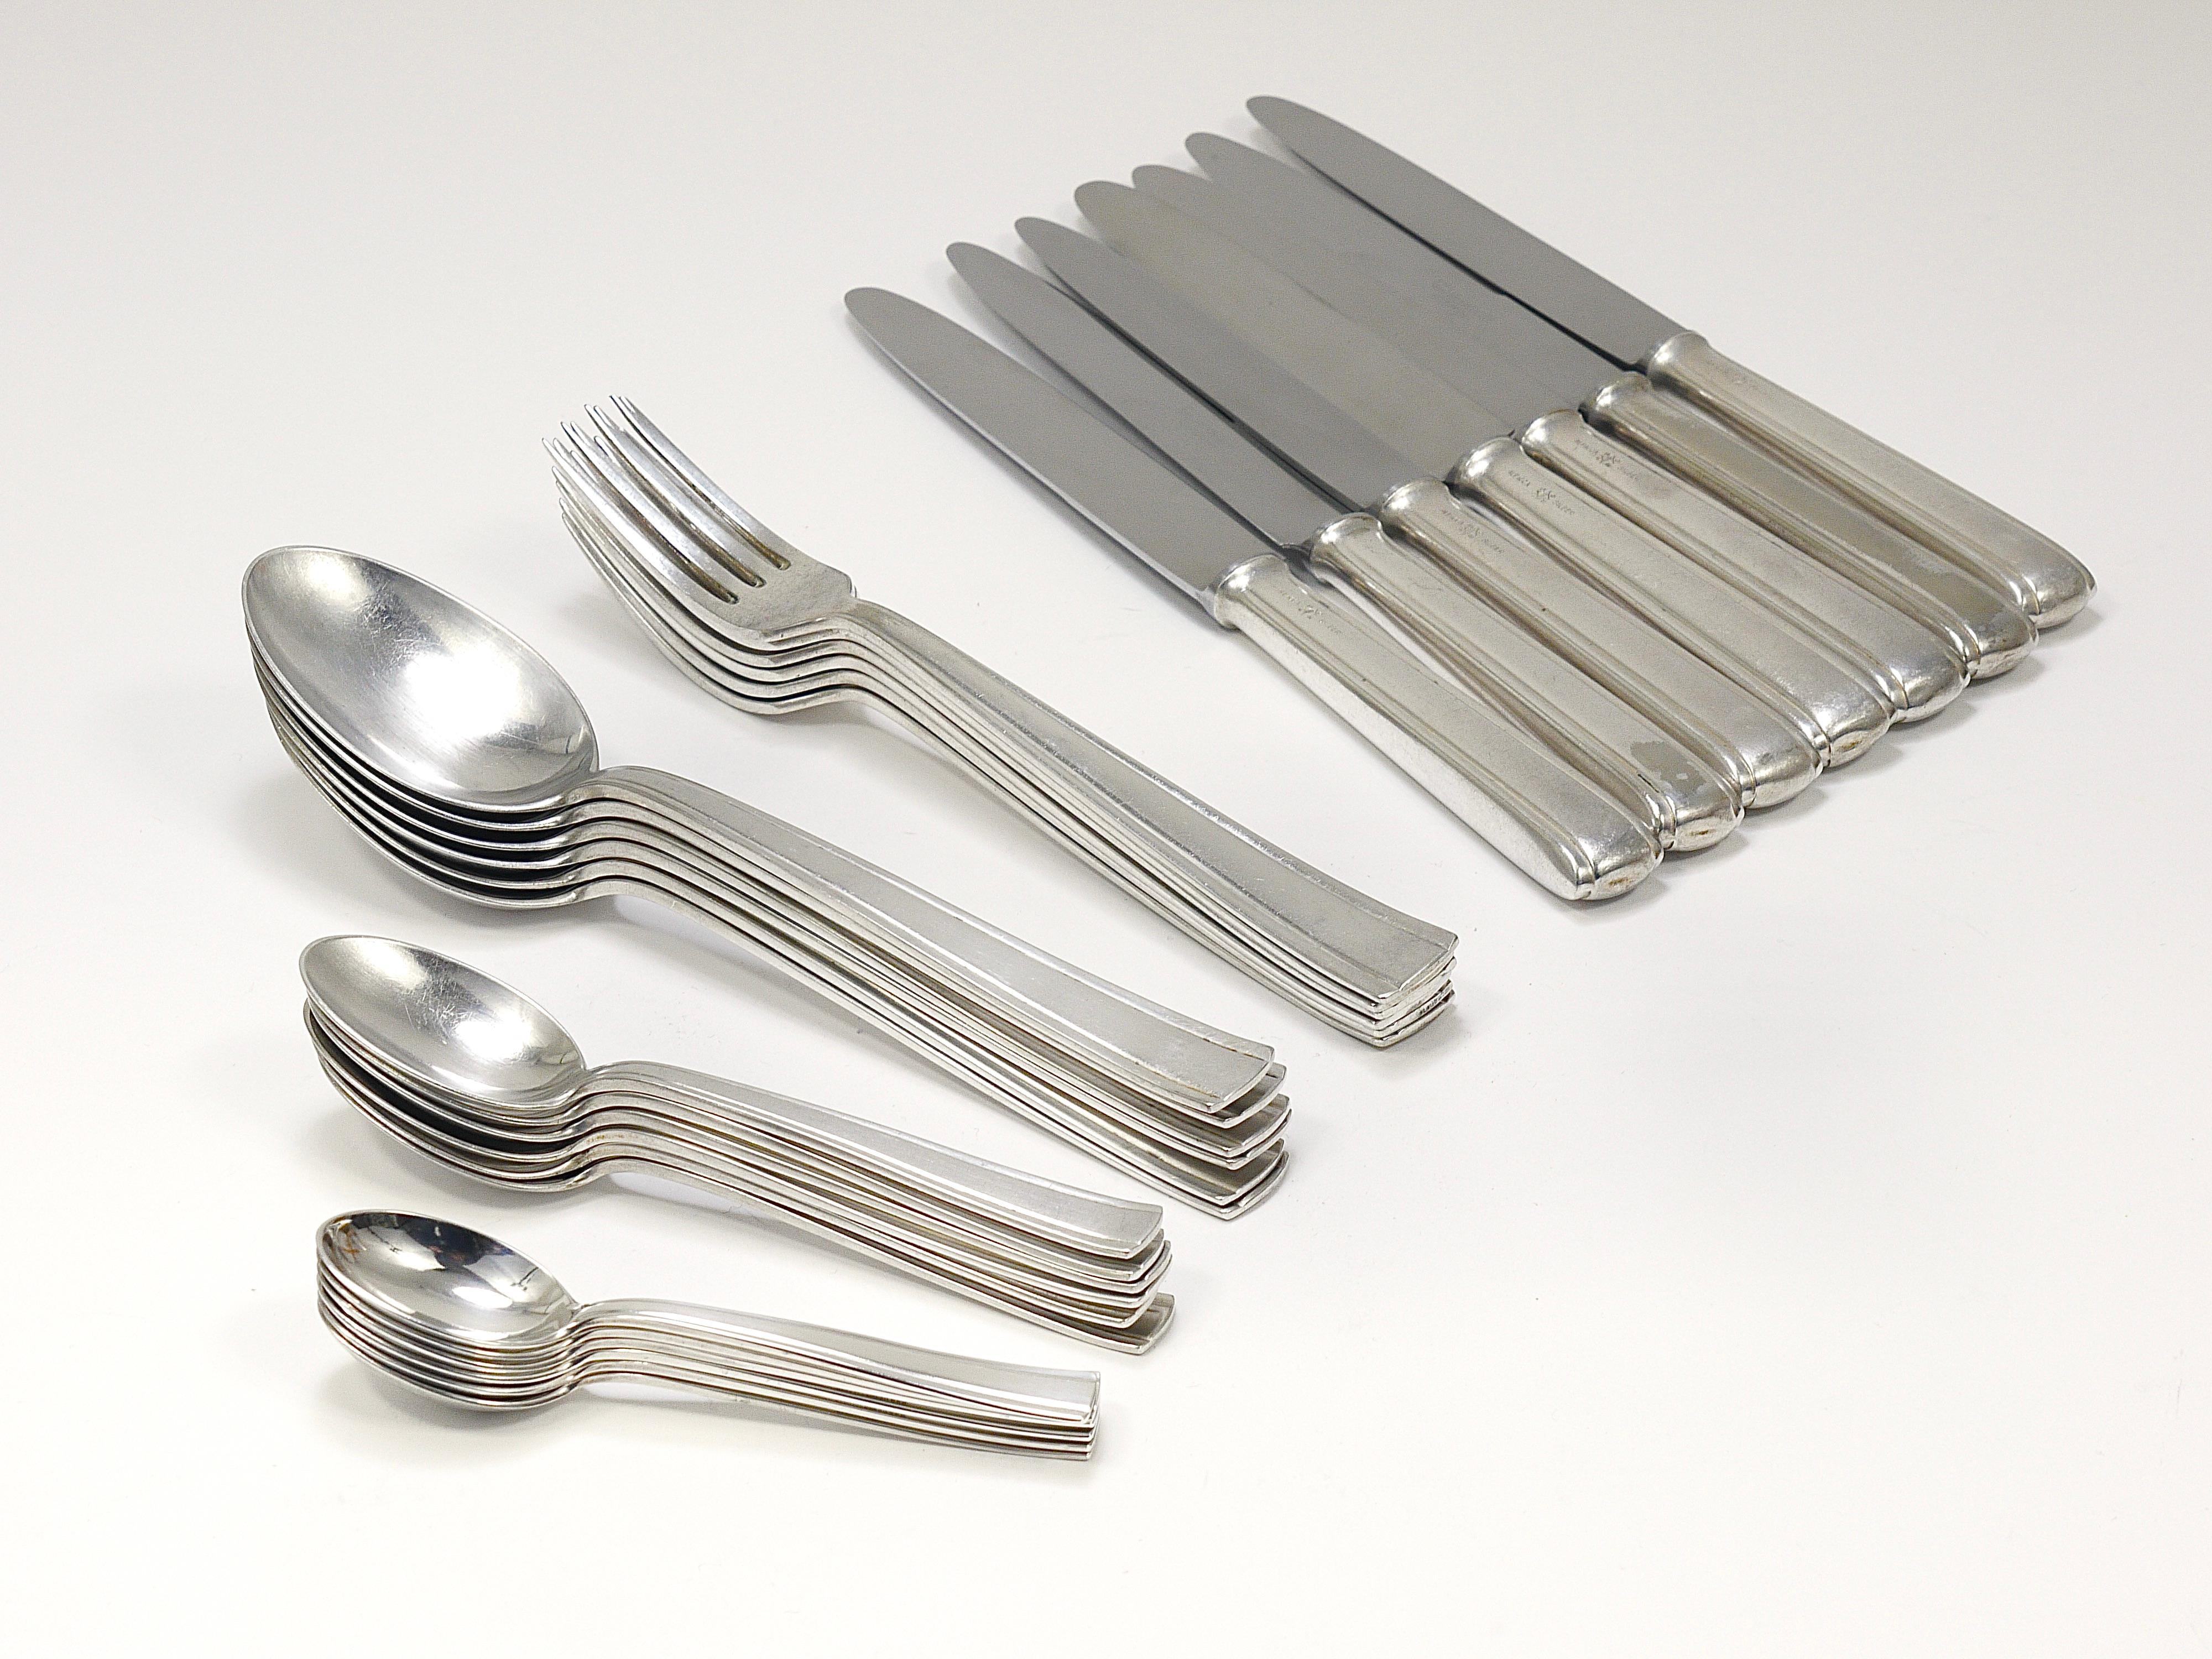 Elegant Art Deco flatware, designed by Gio Ponti for Arthur Krupp and crafted in the 1950s by Krupp Berndorf in Austria. This exquisite cutlery is made from nickel-silvered Alpacca metal, characterized by its strict and geometric lines that